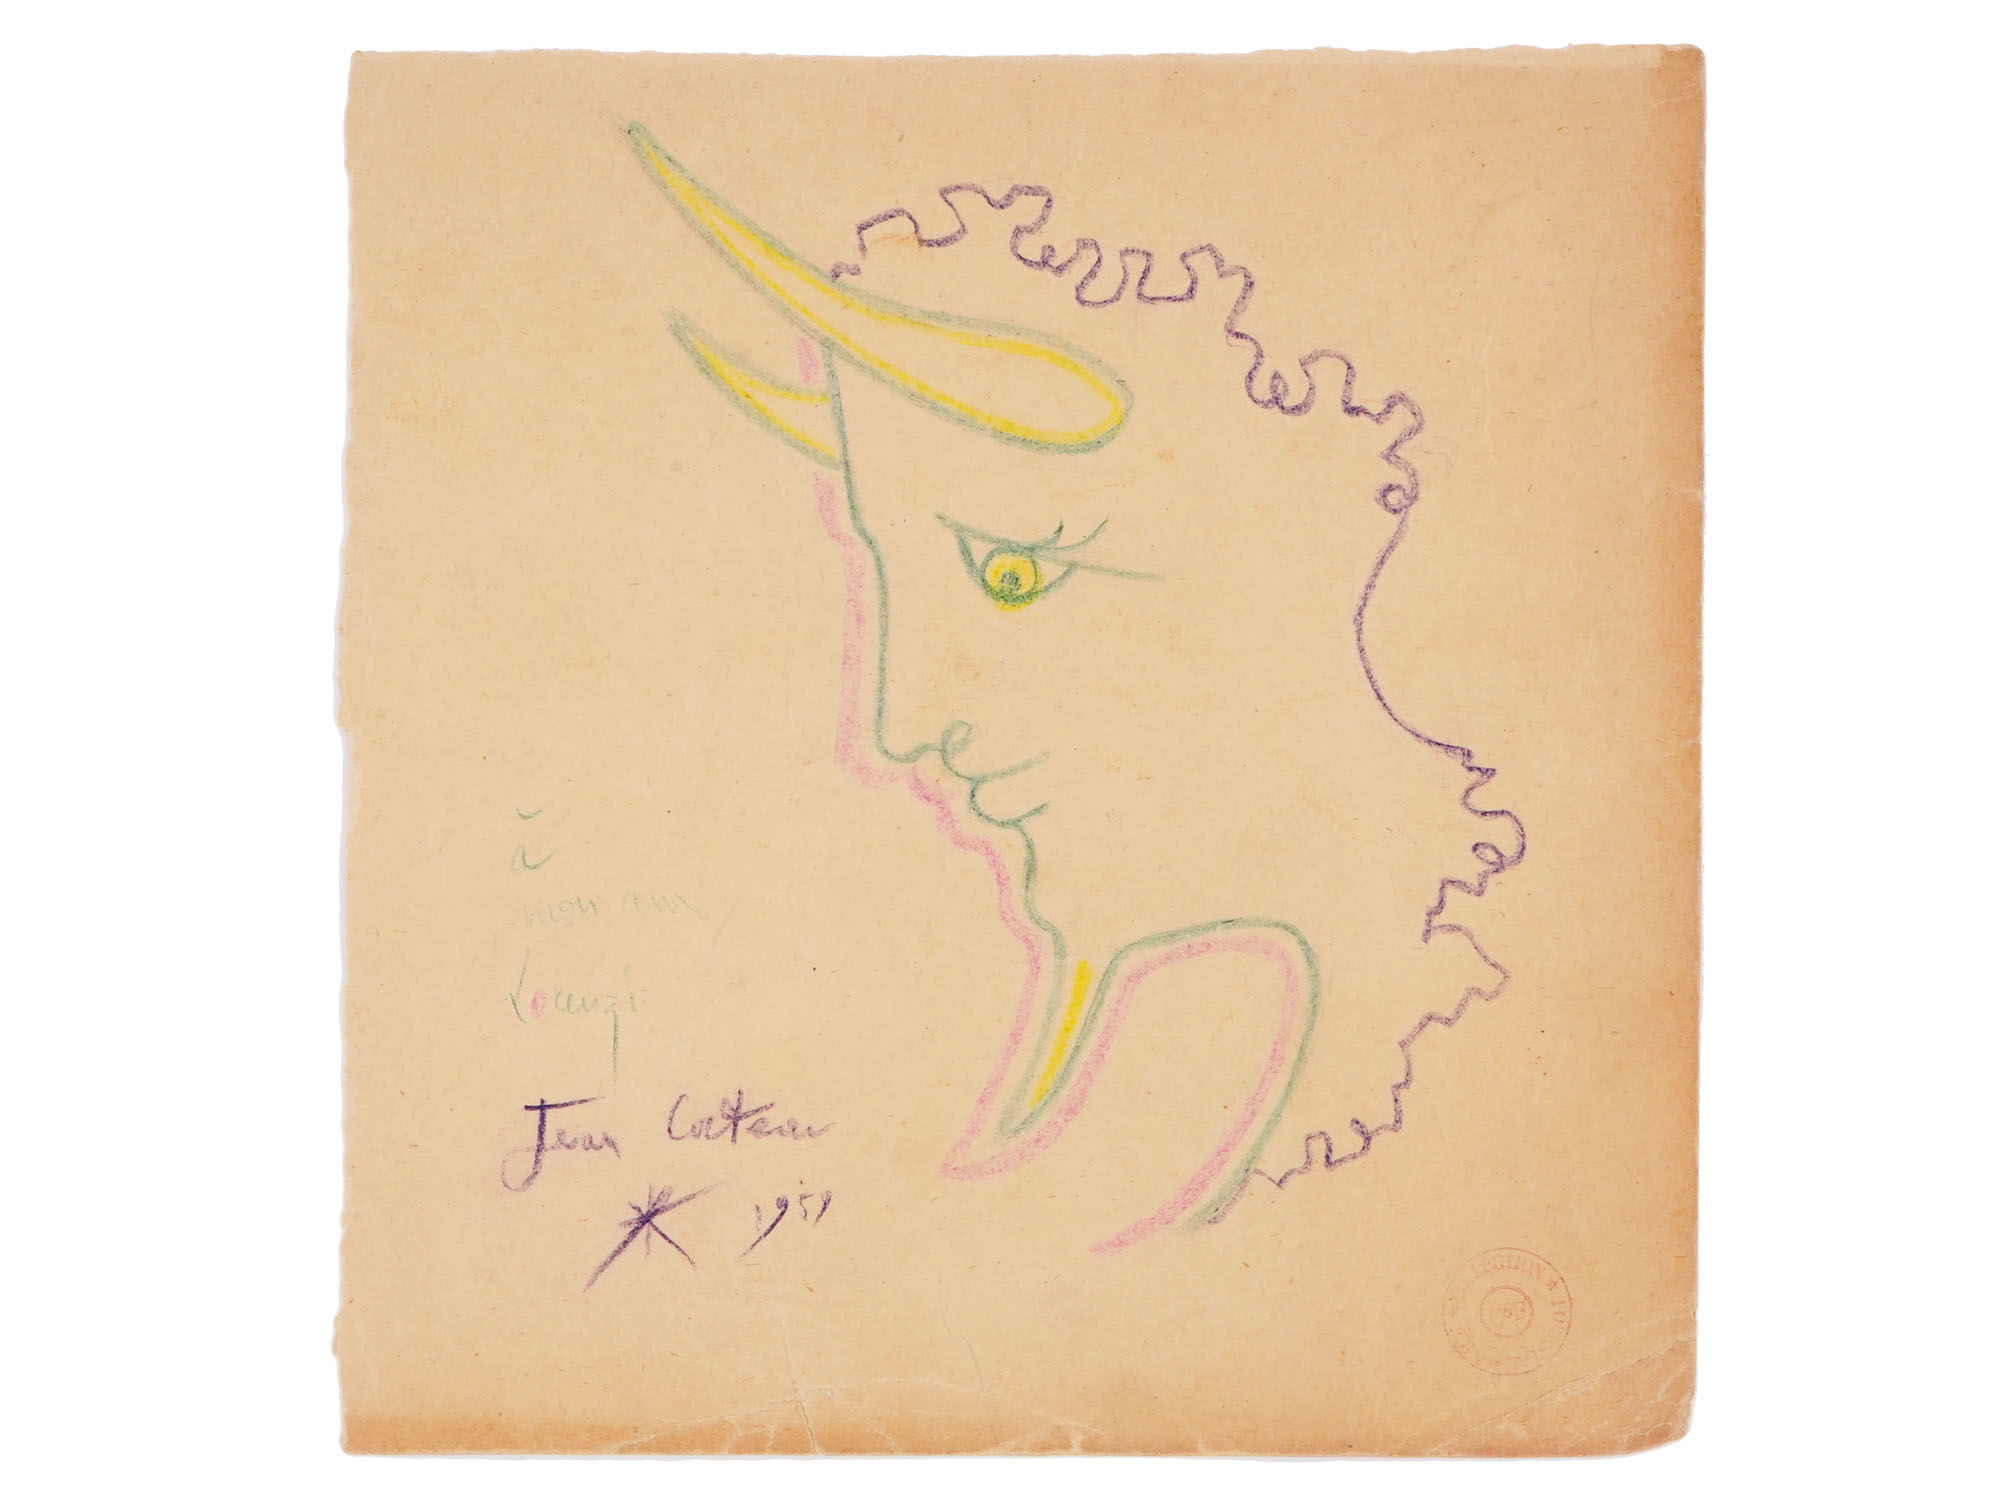 1959 PENCIL DRAWING WITH DEDICATION BY JEAN COCTEAU PIC-1